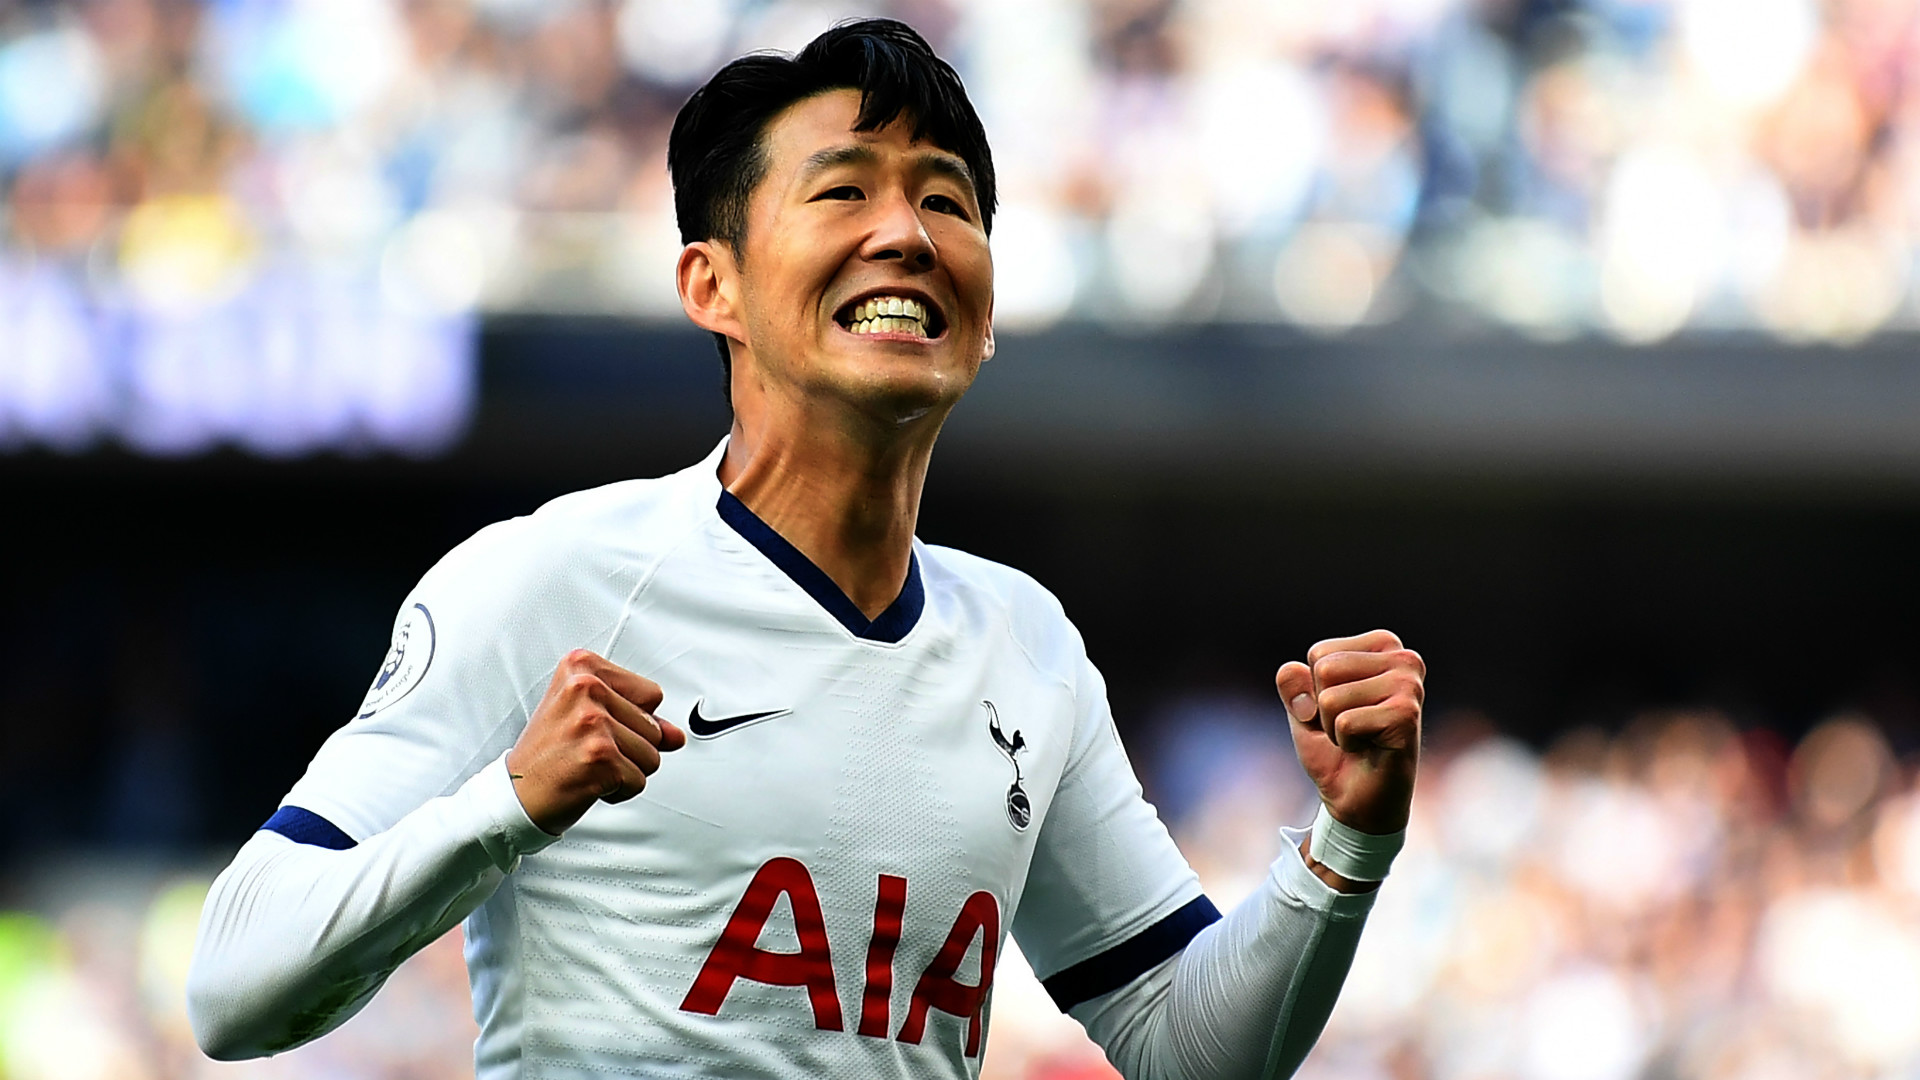 Tottenham transfer news Spurs star HeungMin Son could join Napoli, according to his agent